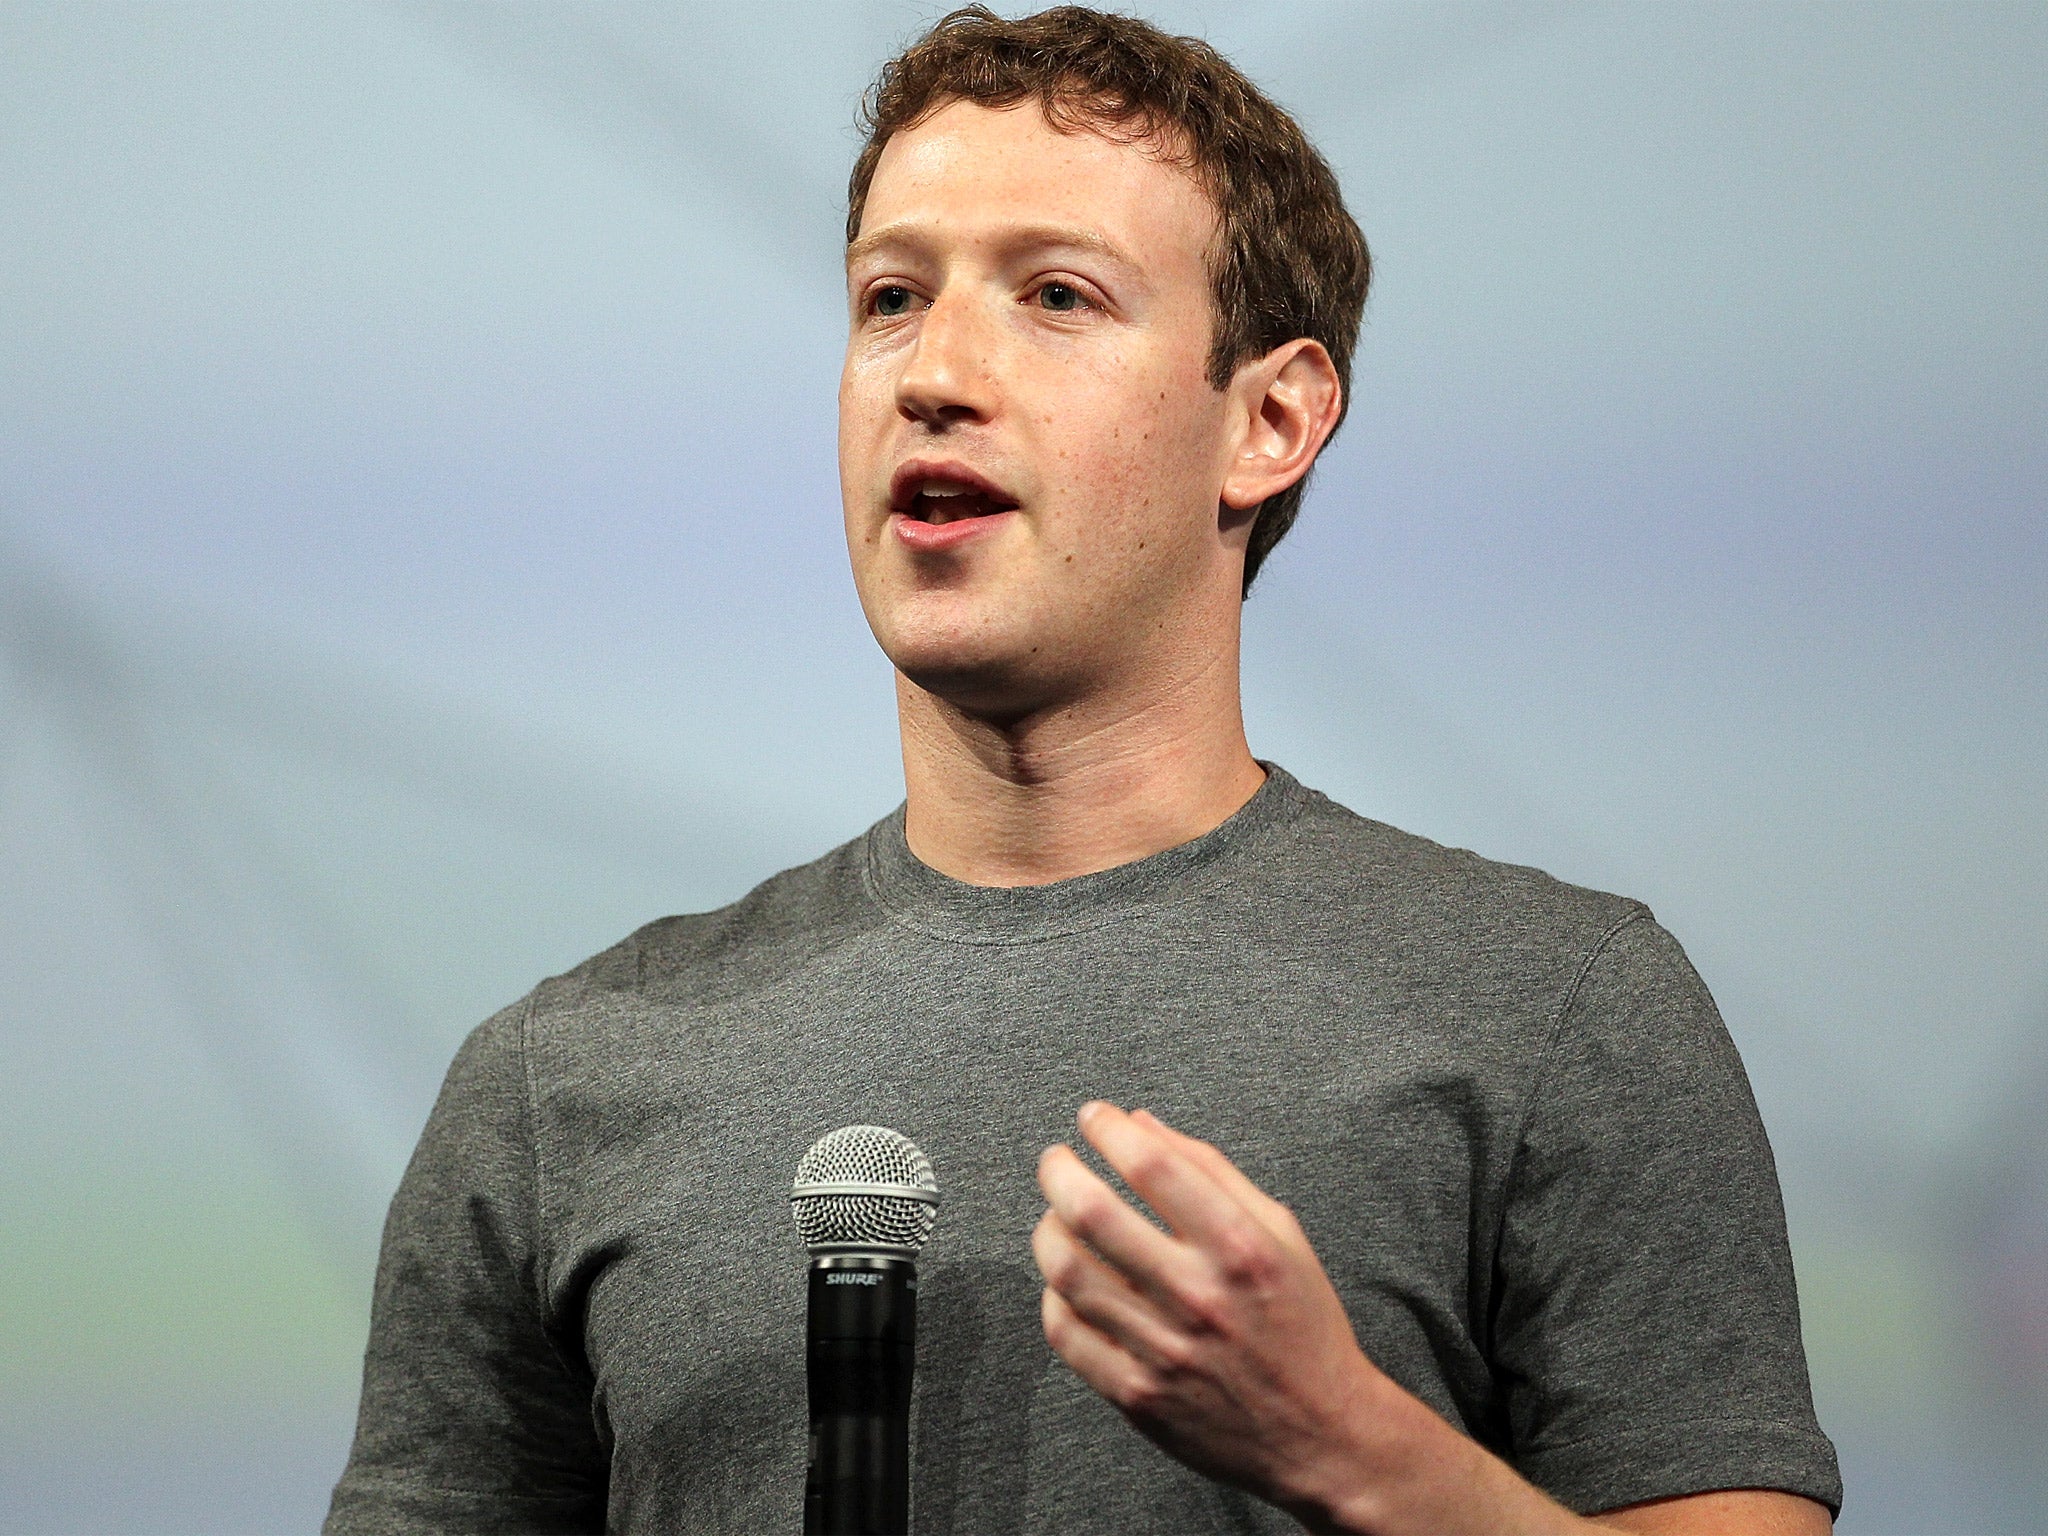 Facebook CEO Mark Zuckerberg speaking at a conference in San Francisco